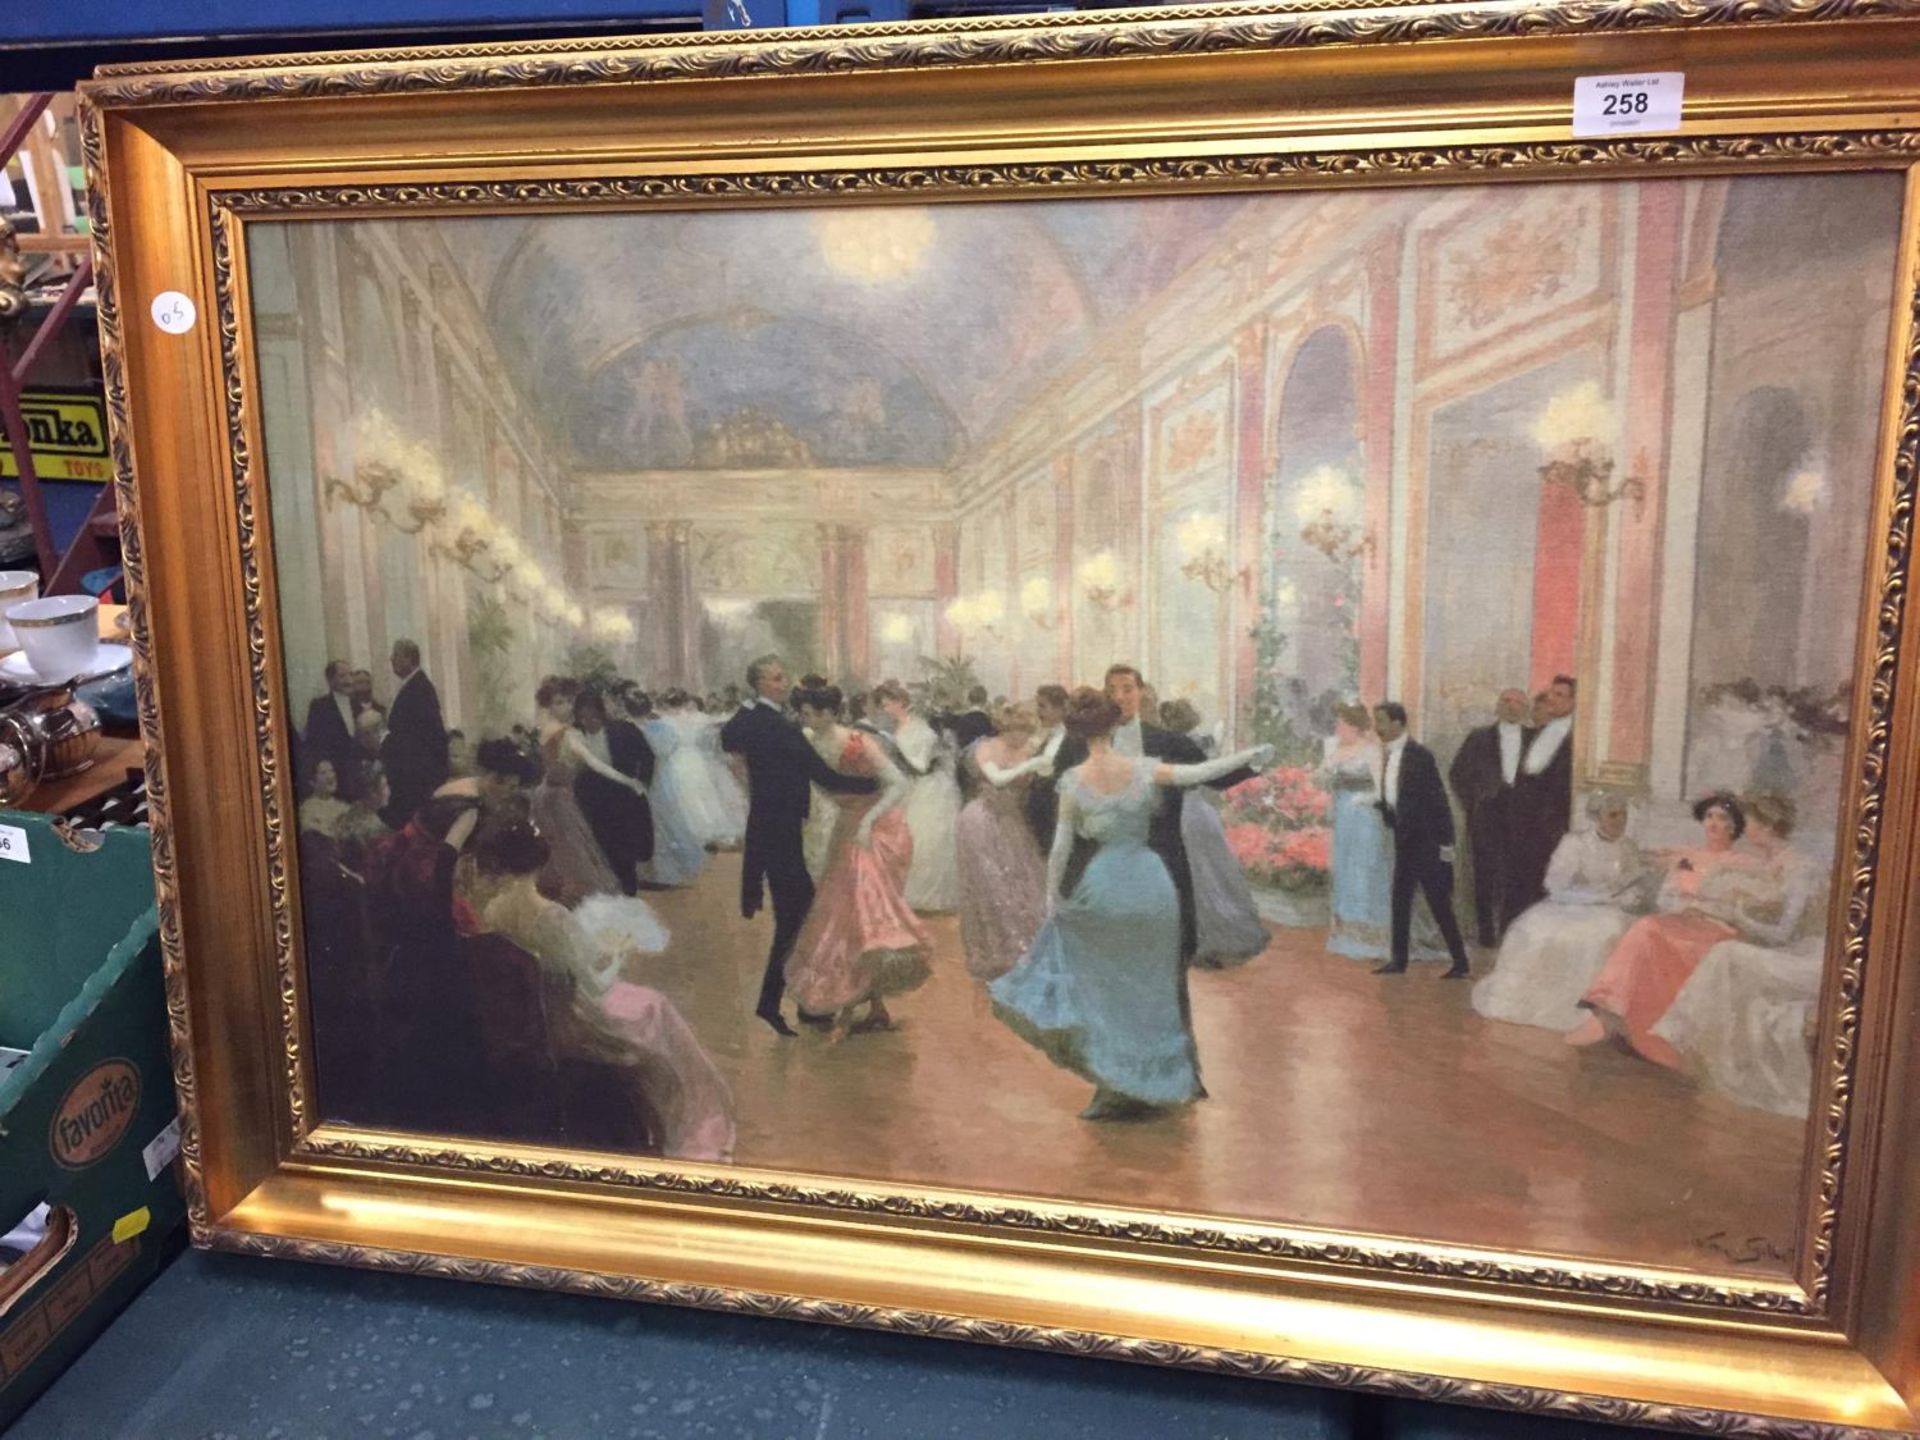 A LARGE GILT FRAMED PICTURE OF A BALL - Image 2 of 3